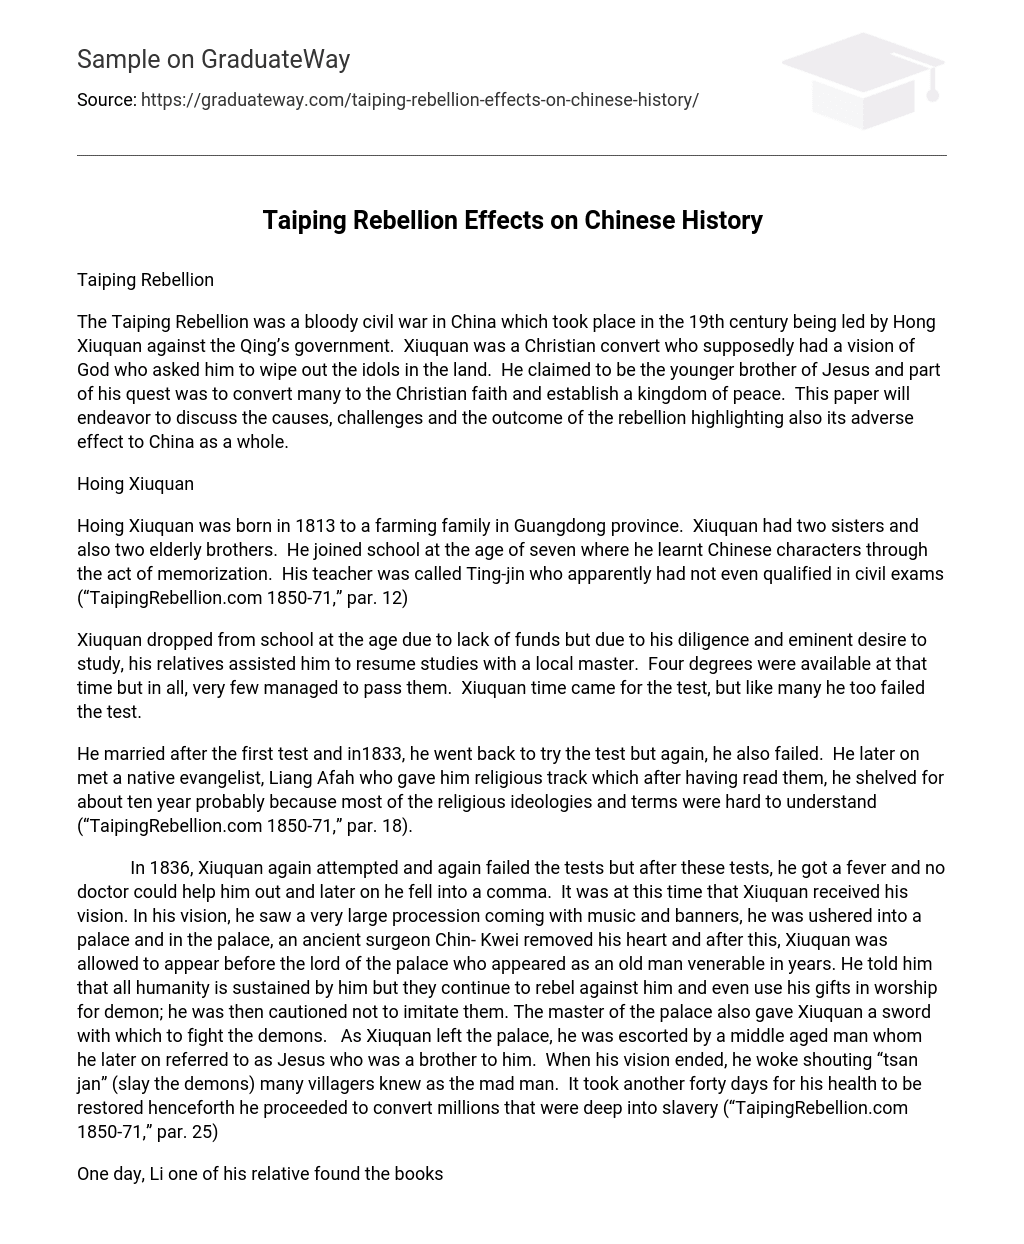 Taiping Rebellion Effects on Chinese History